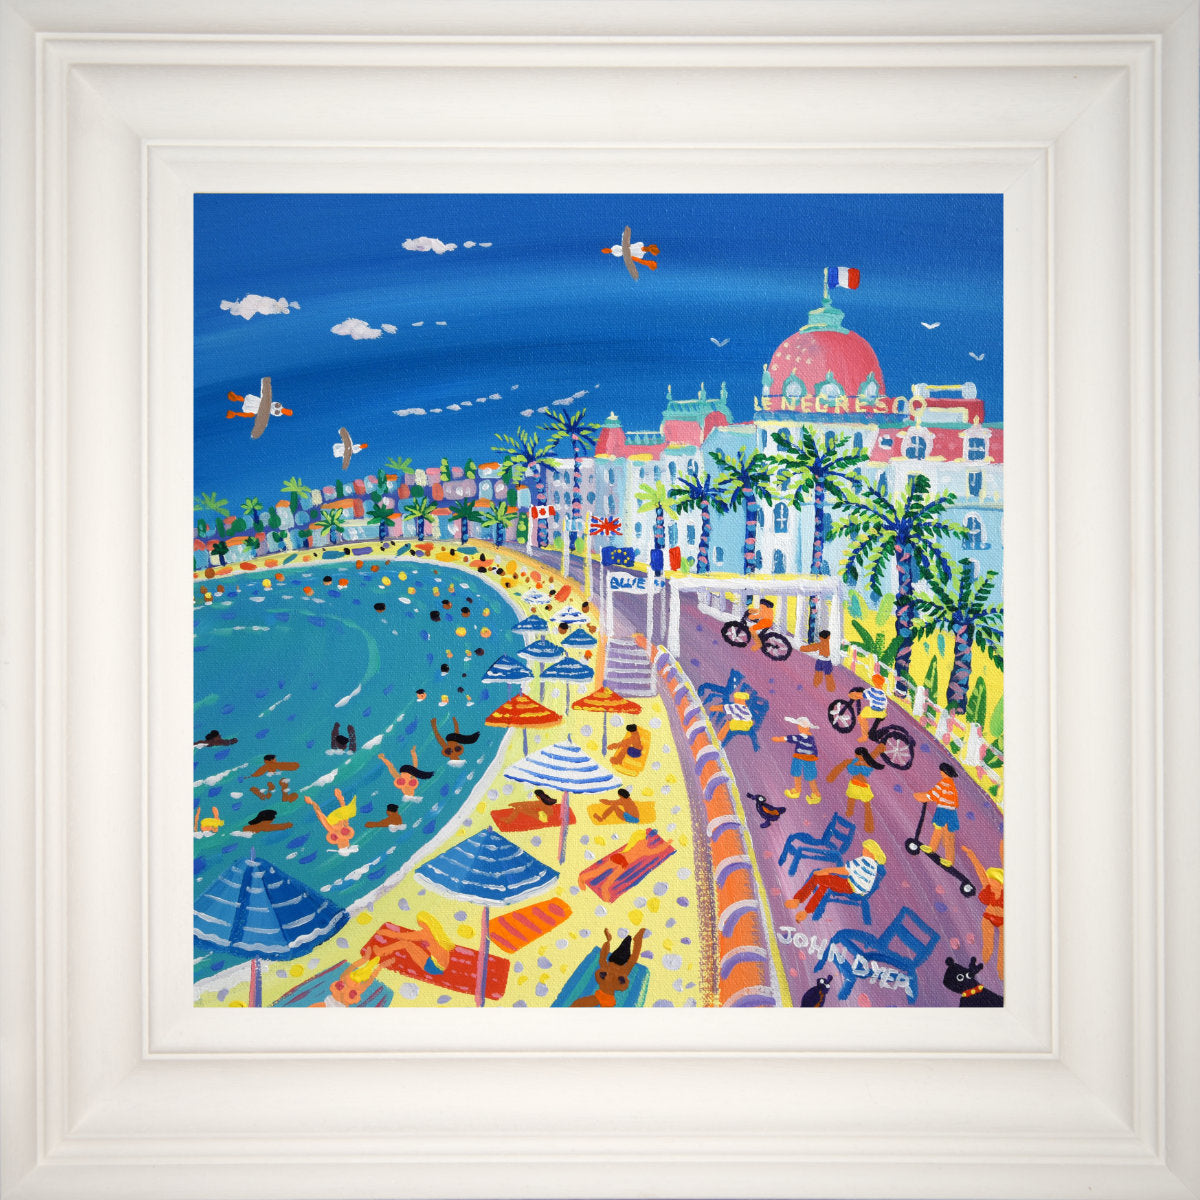 'Summer Fun on the Beach, Le Negresco, Nice', 12x12 inches acrylic on canvas. Paintings of Monaco by British Artist John Dyer. French Art Gallery